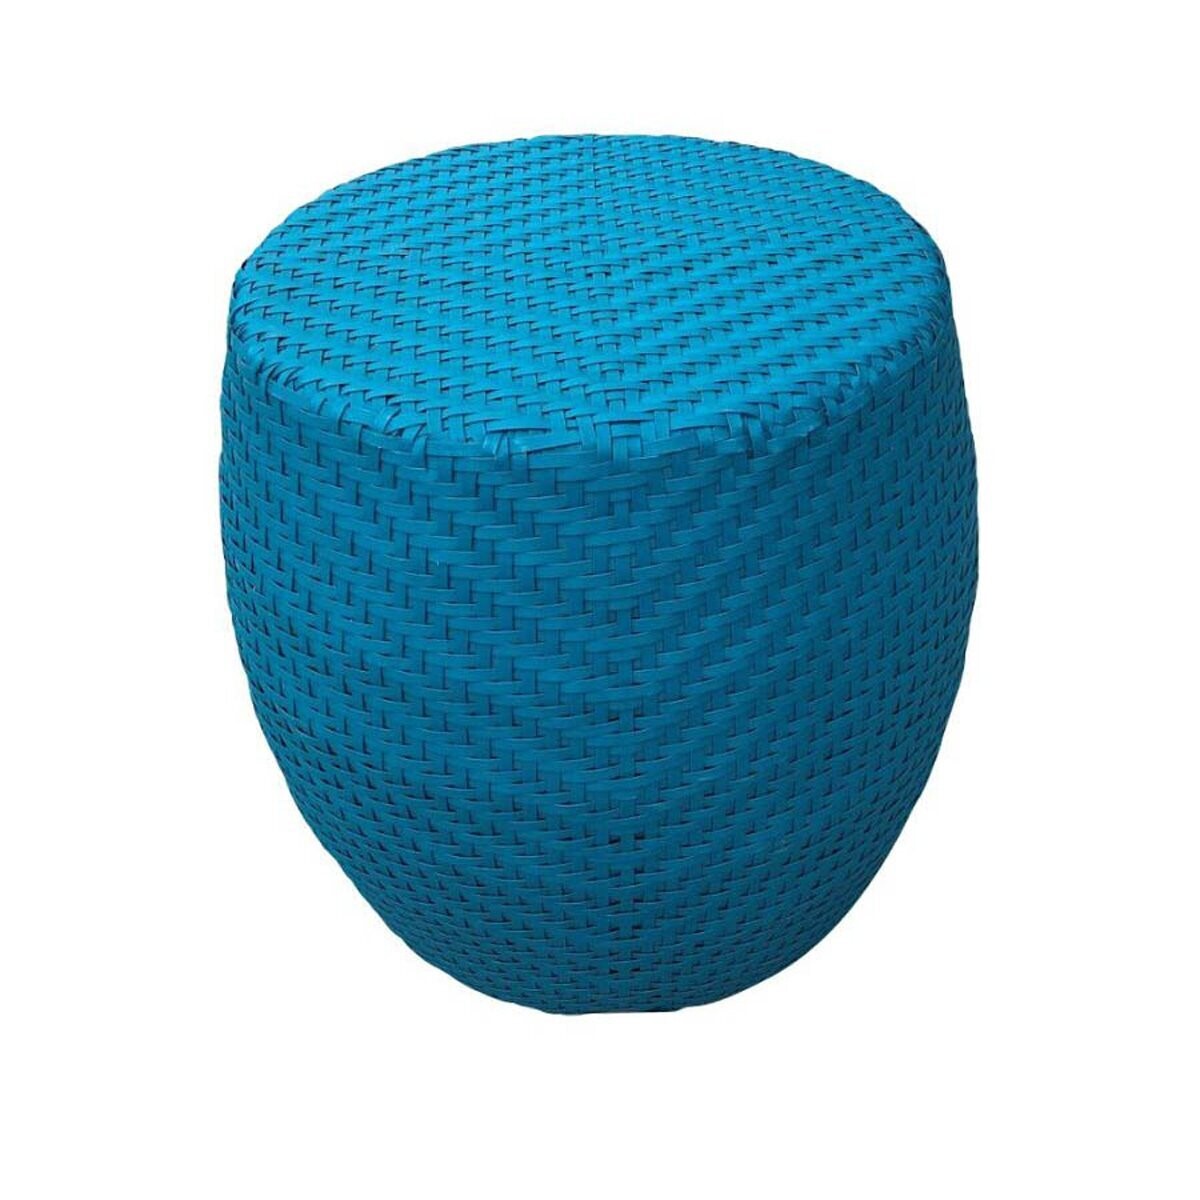 Congo Side Table in Turquoise